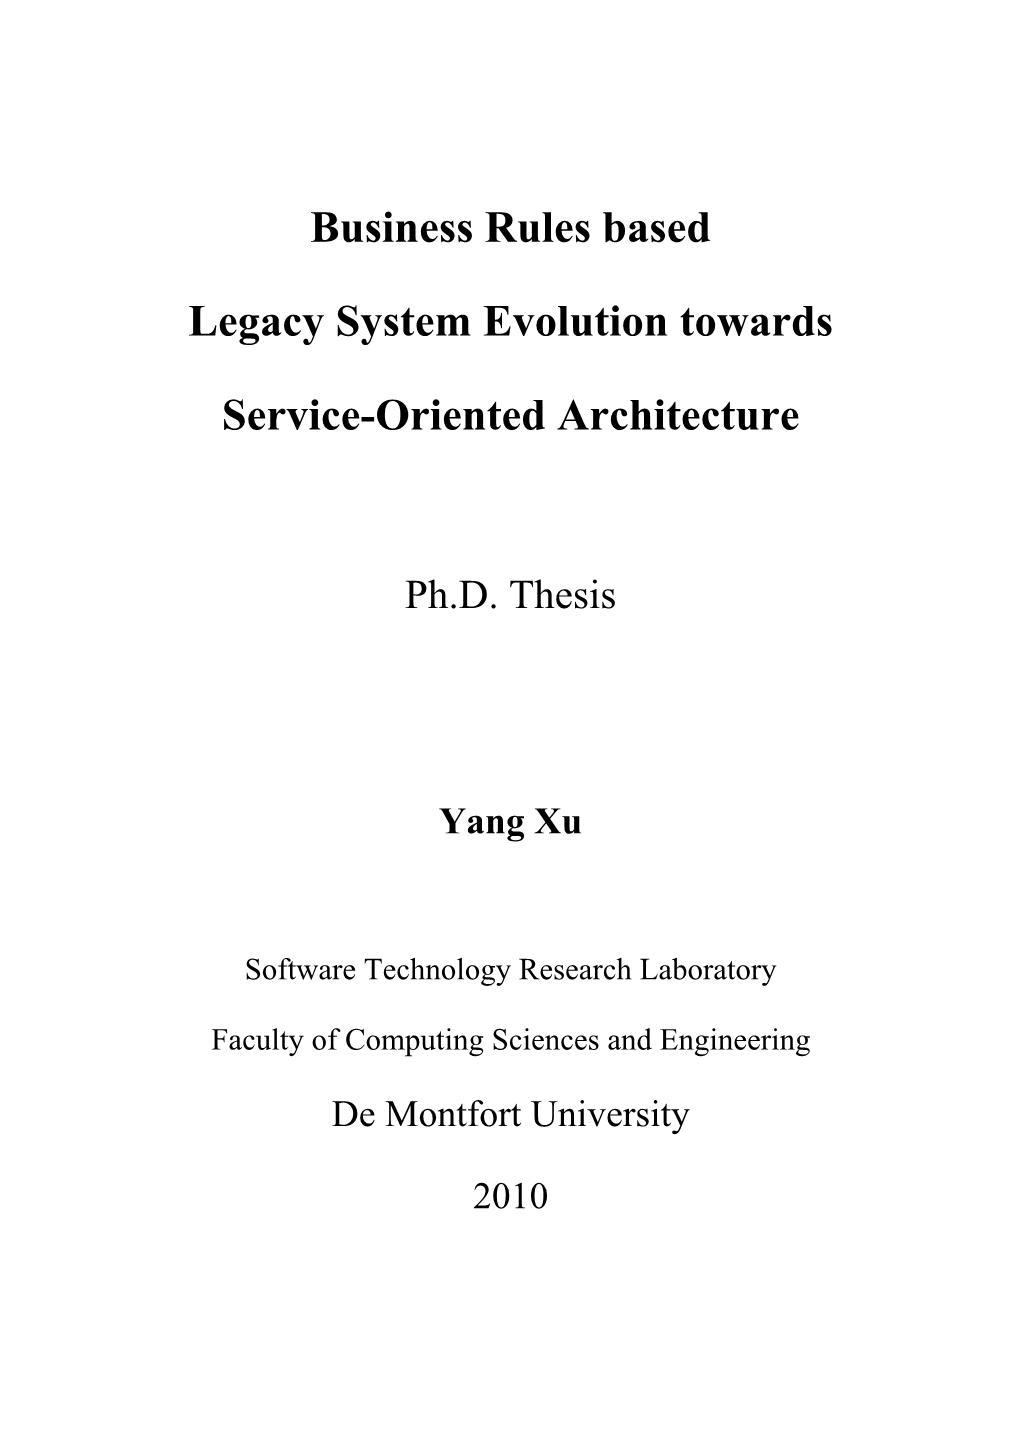 Business Rules Based Legacy System Evolution Towards Service